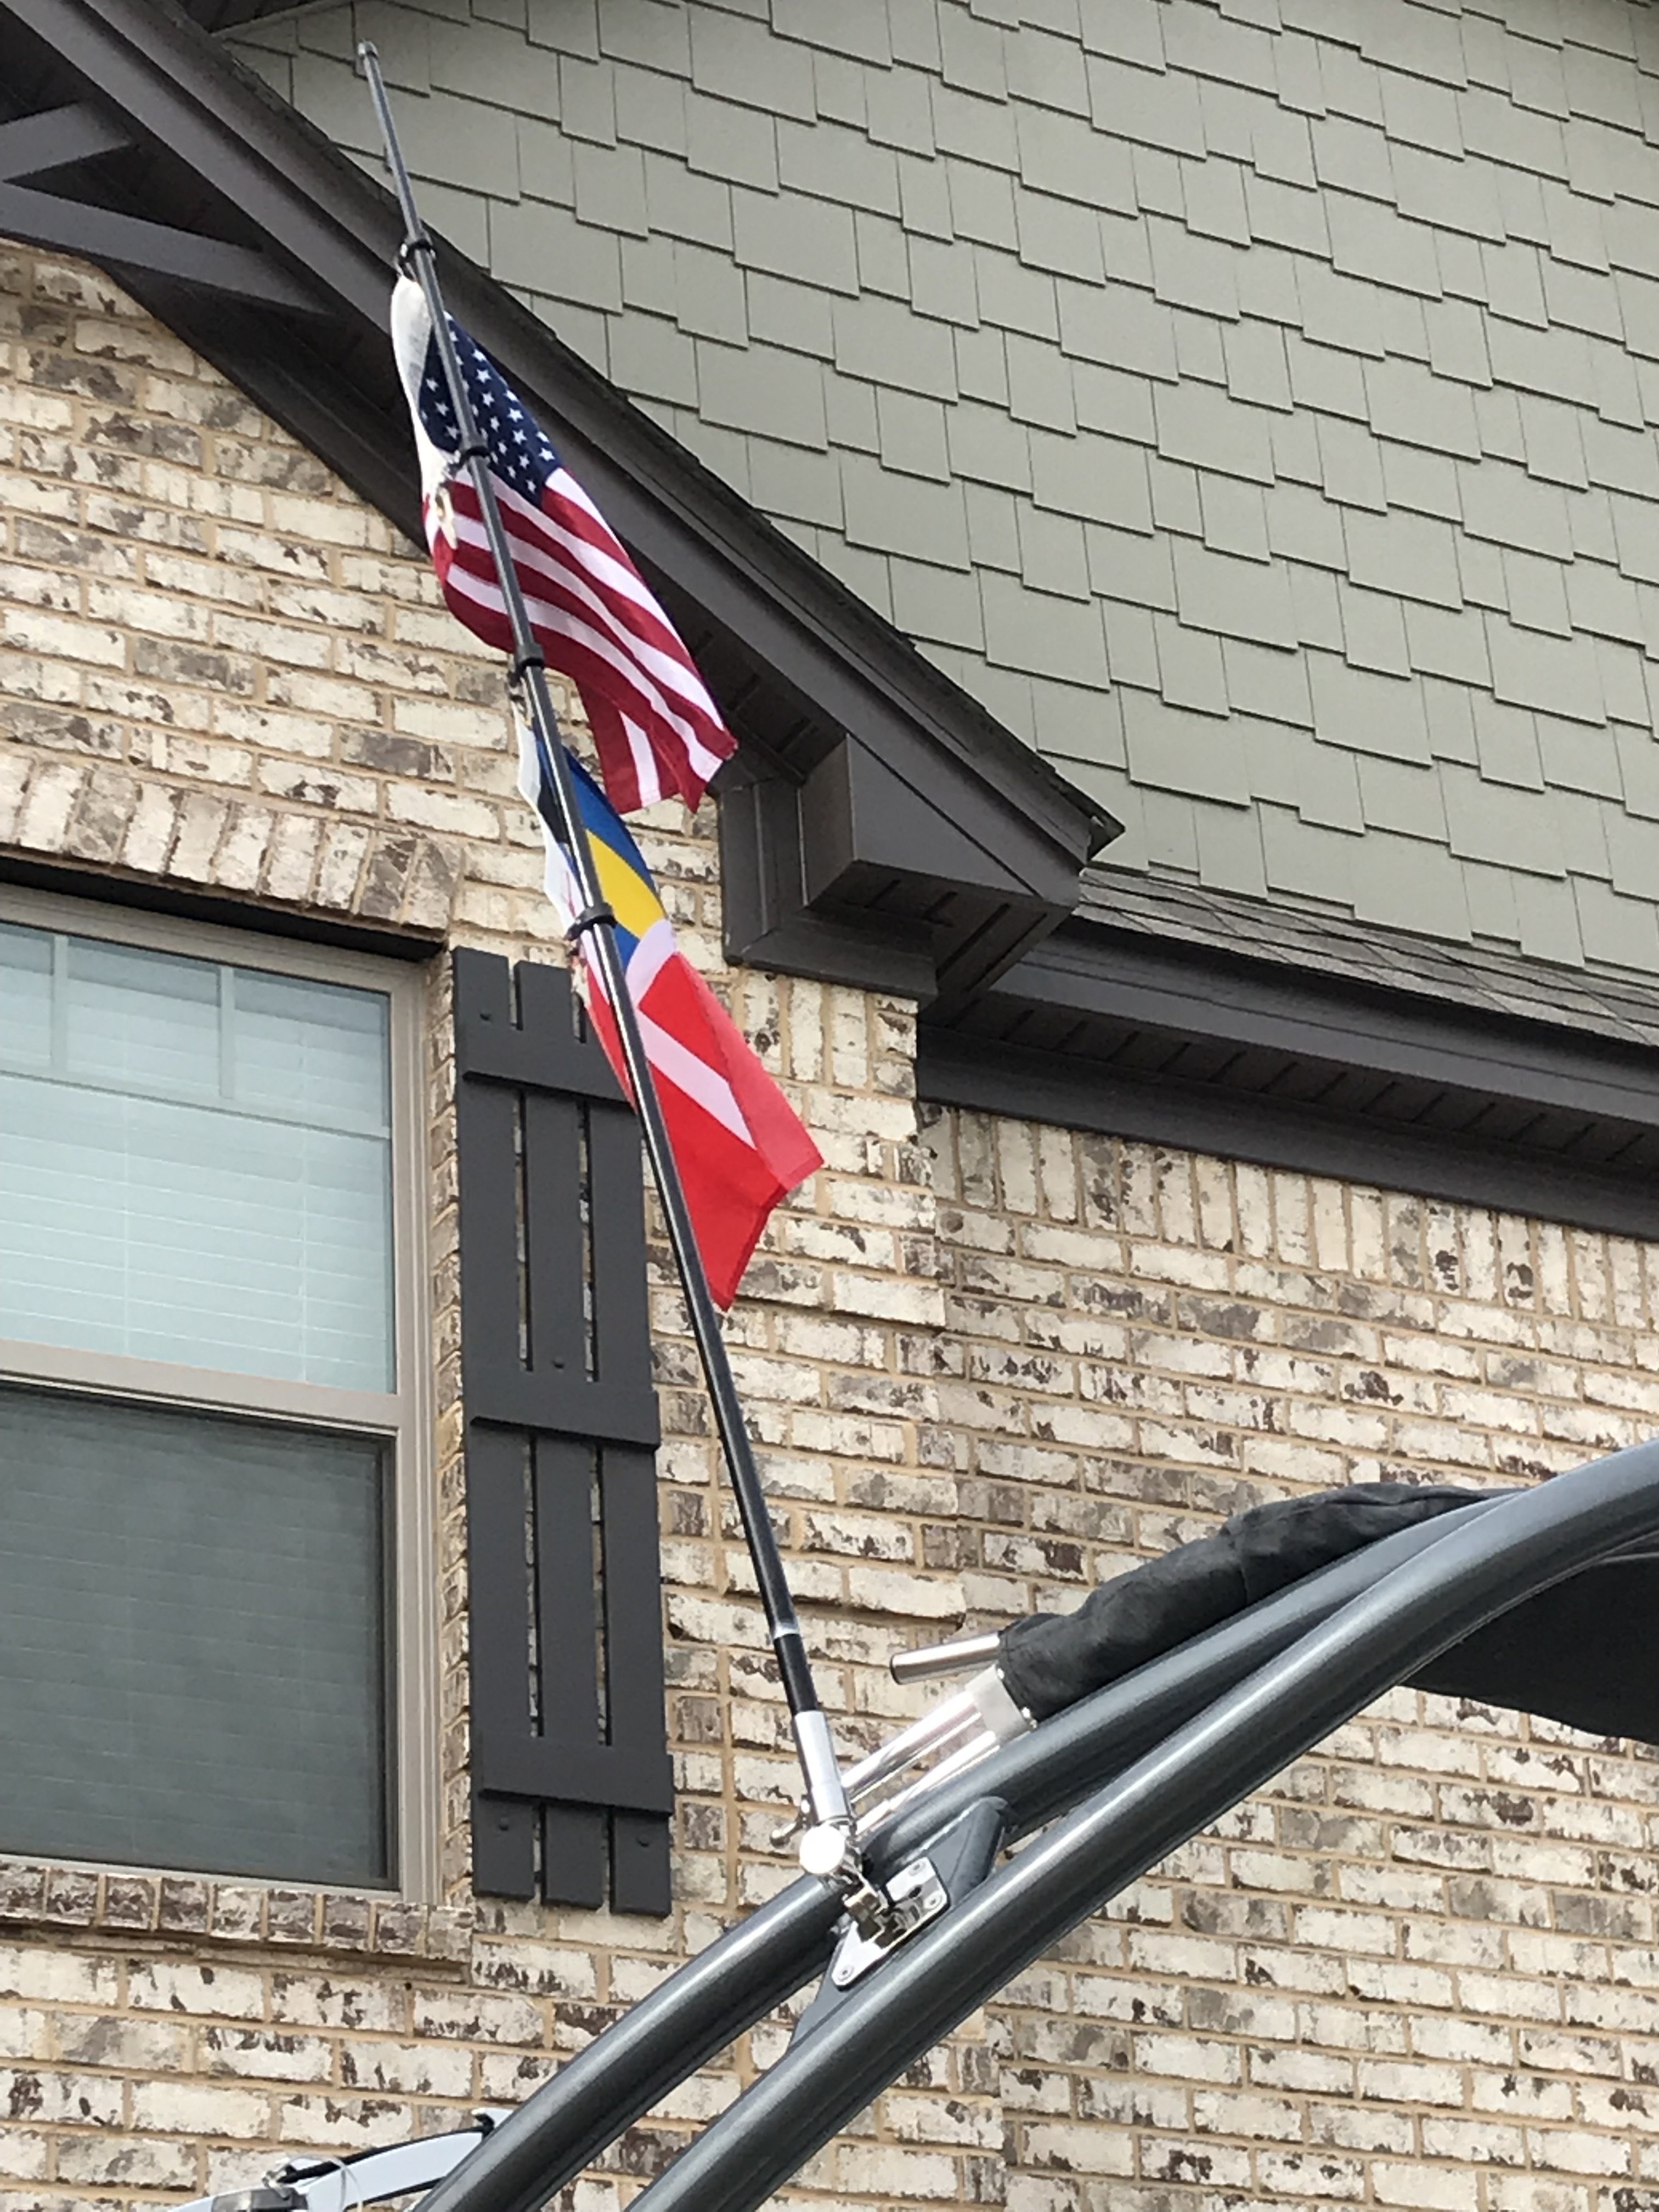 VHF Antenna with Flags